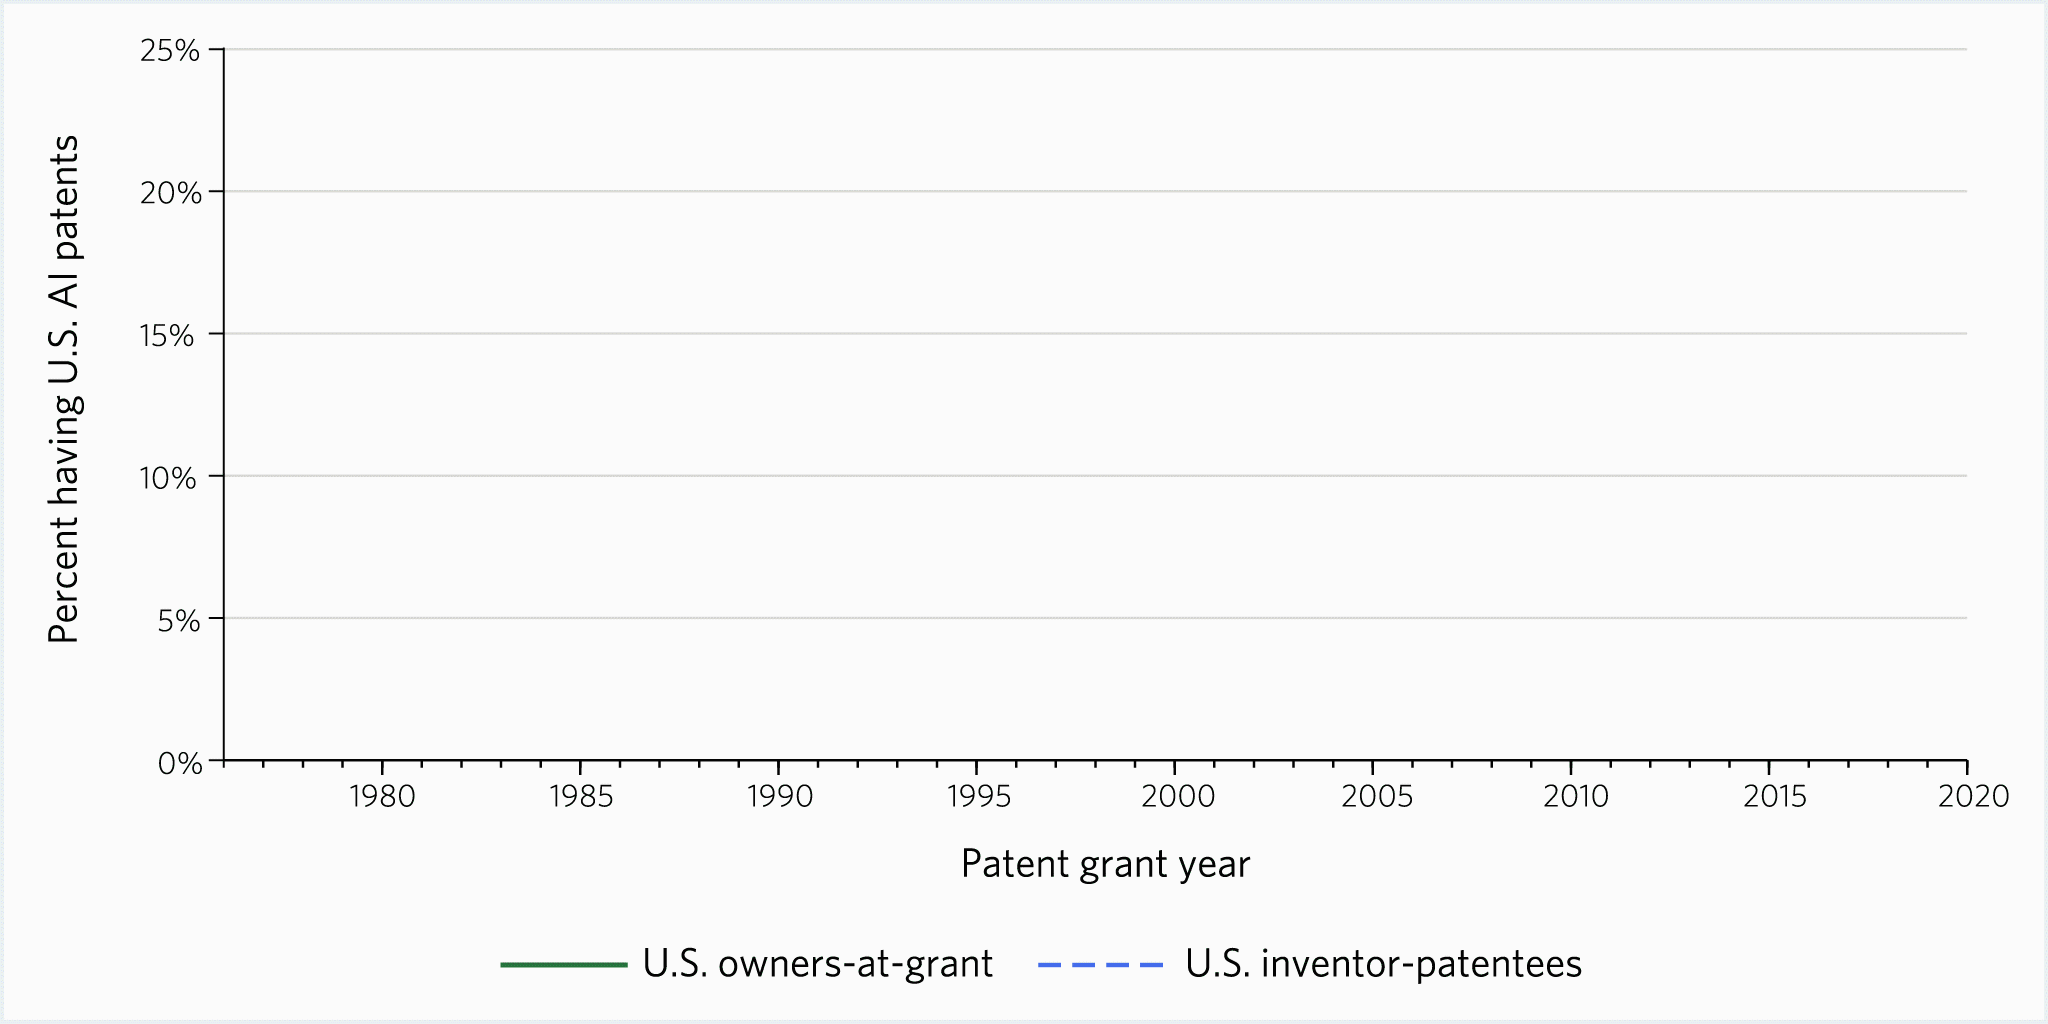 Graph of patent grant year (1976-2020) x-axis vs percent U.S. AI patents (0-25%); solid green line for U.S. owners-at-grant, blue dashed line for U.S. inventor-patentees. Start 1-2%, concave rise with dip 2015; owners higher until 2009 then inventors higher. Owners end 22.1%, inventors 24.9%.